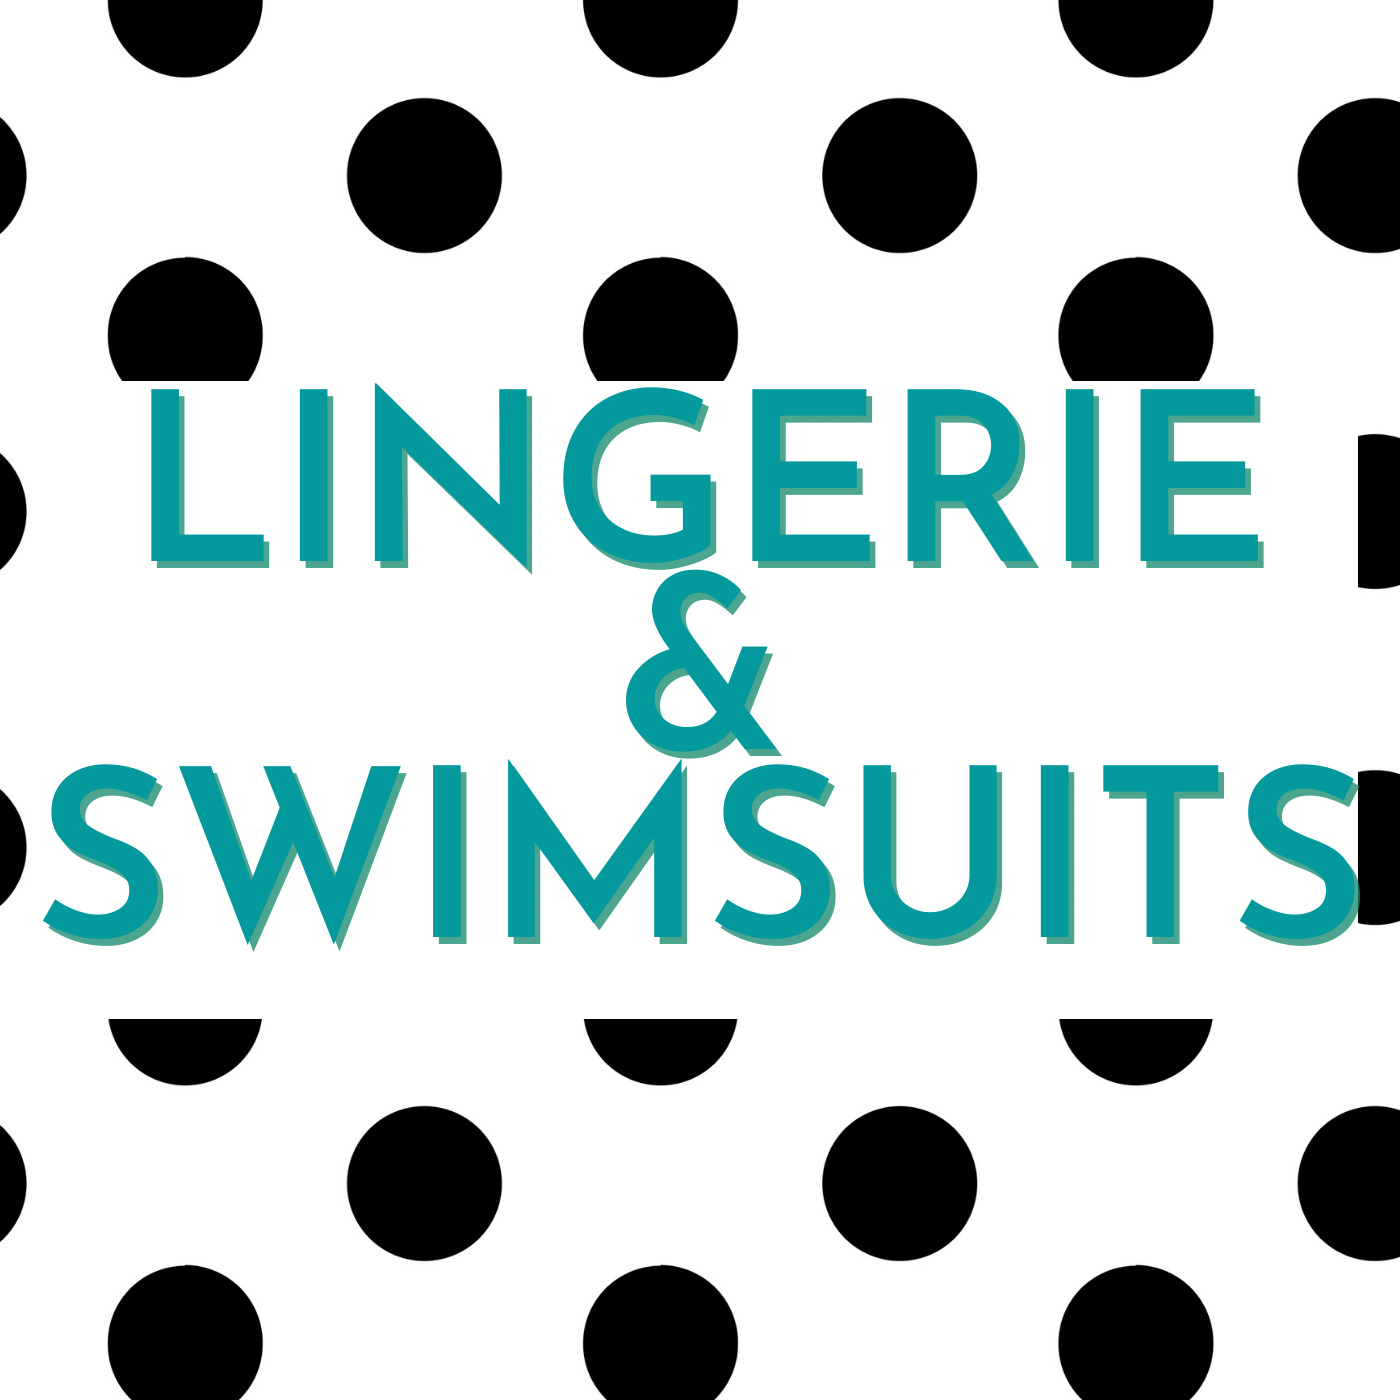 Lingerie & Swimsuits